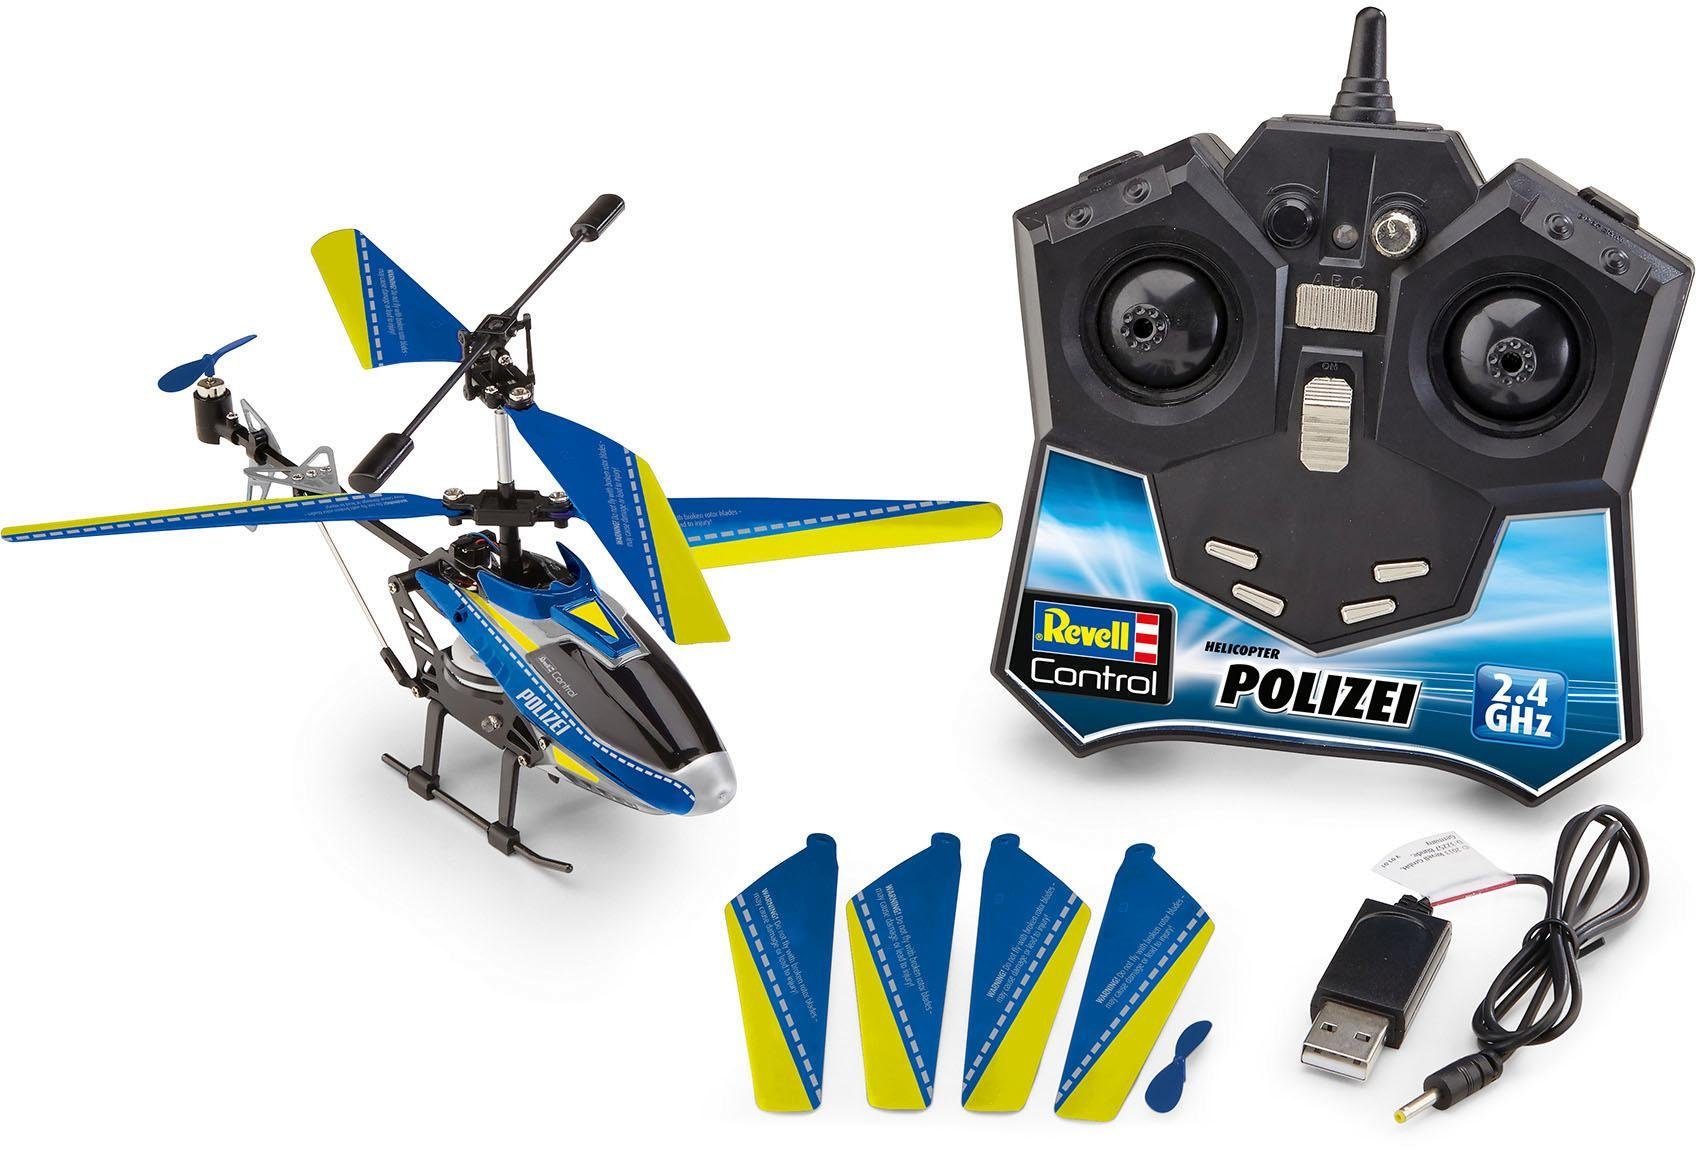 Image of Revell® RC-Helikopter »Revell® control, Polizei, 2,4 GHz«, mit LED Beleuchtungseffekten